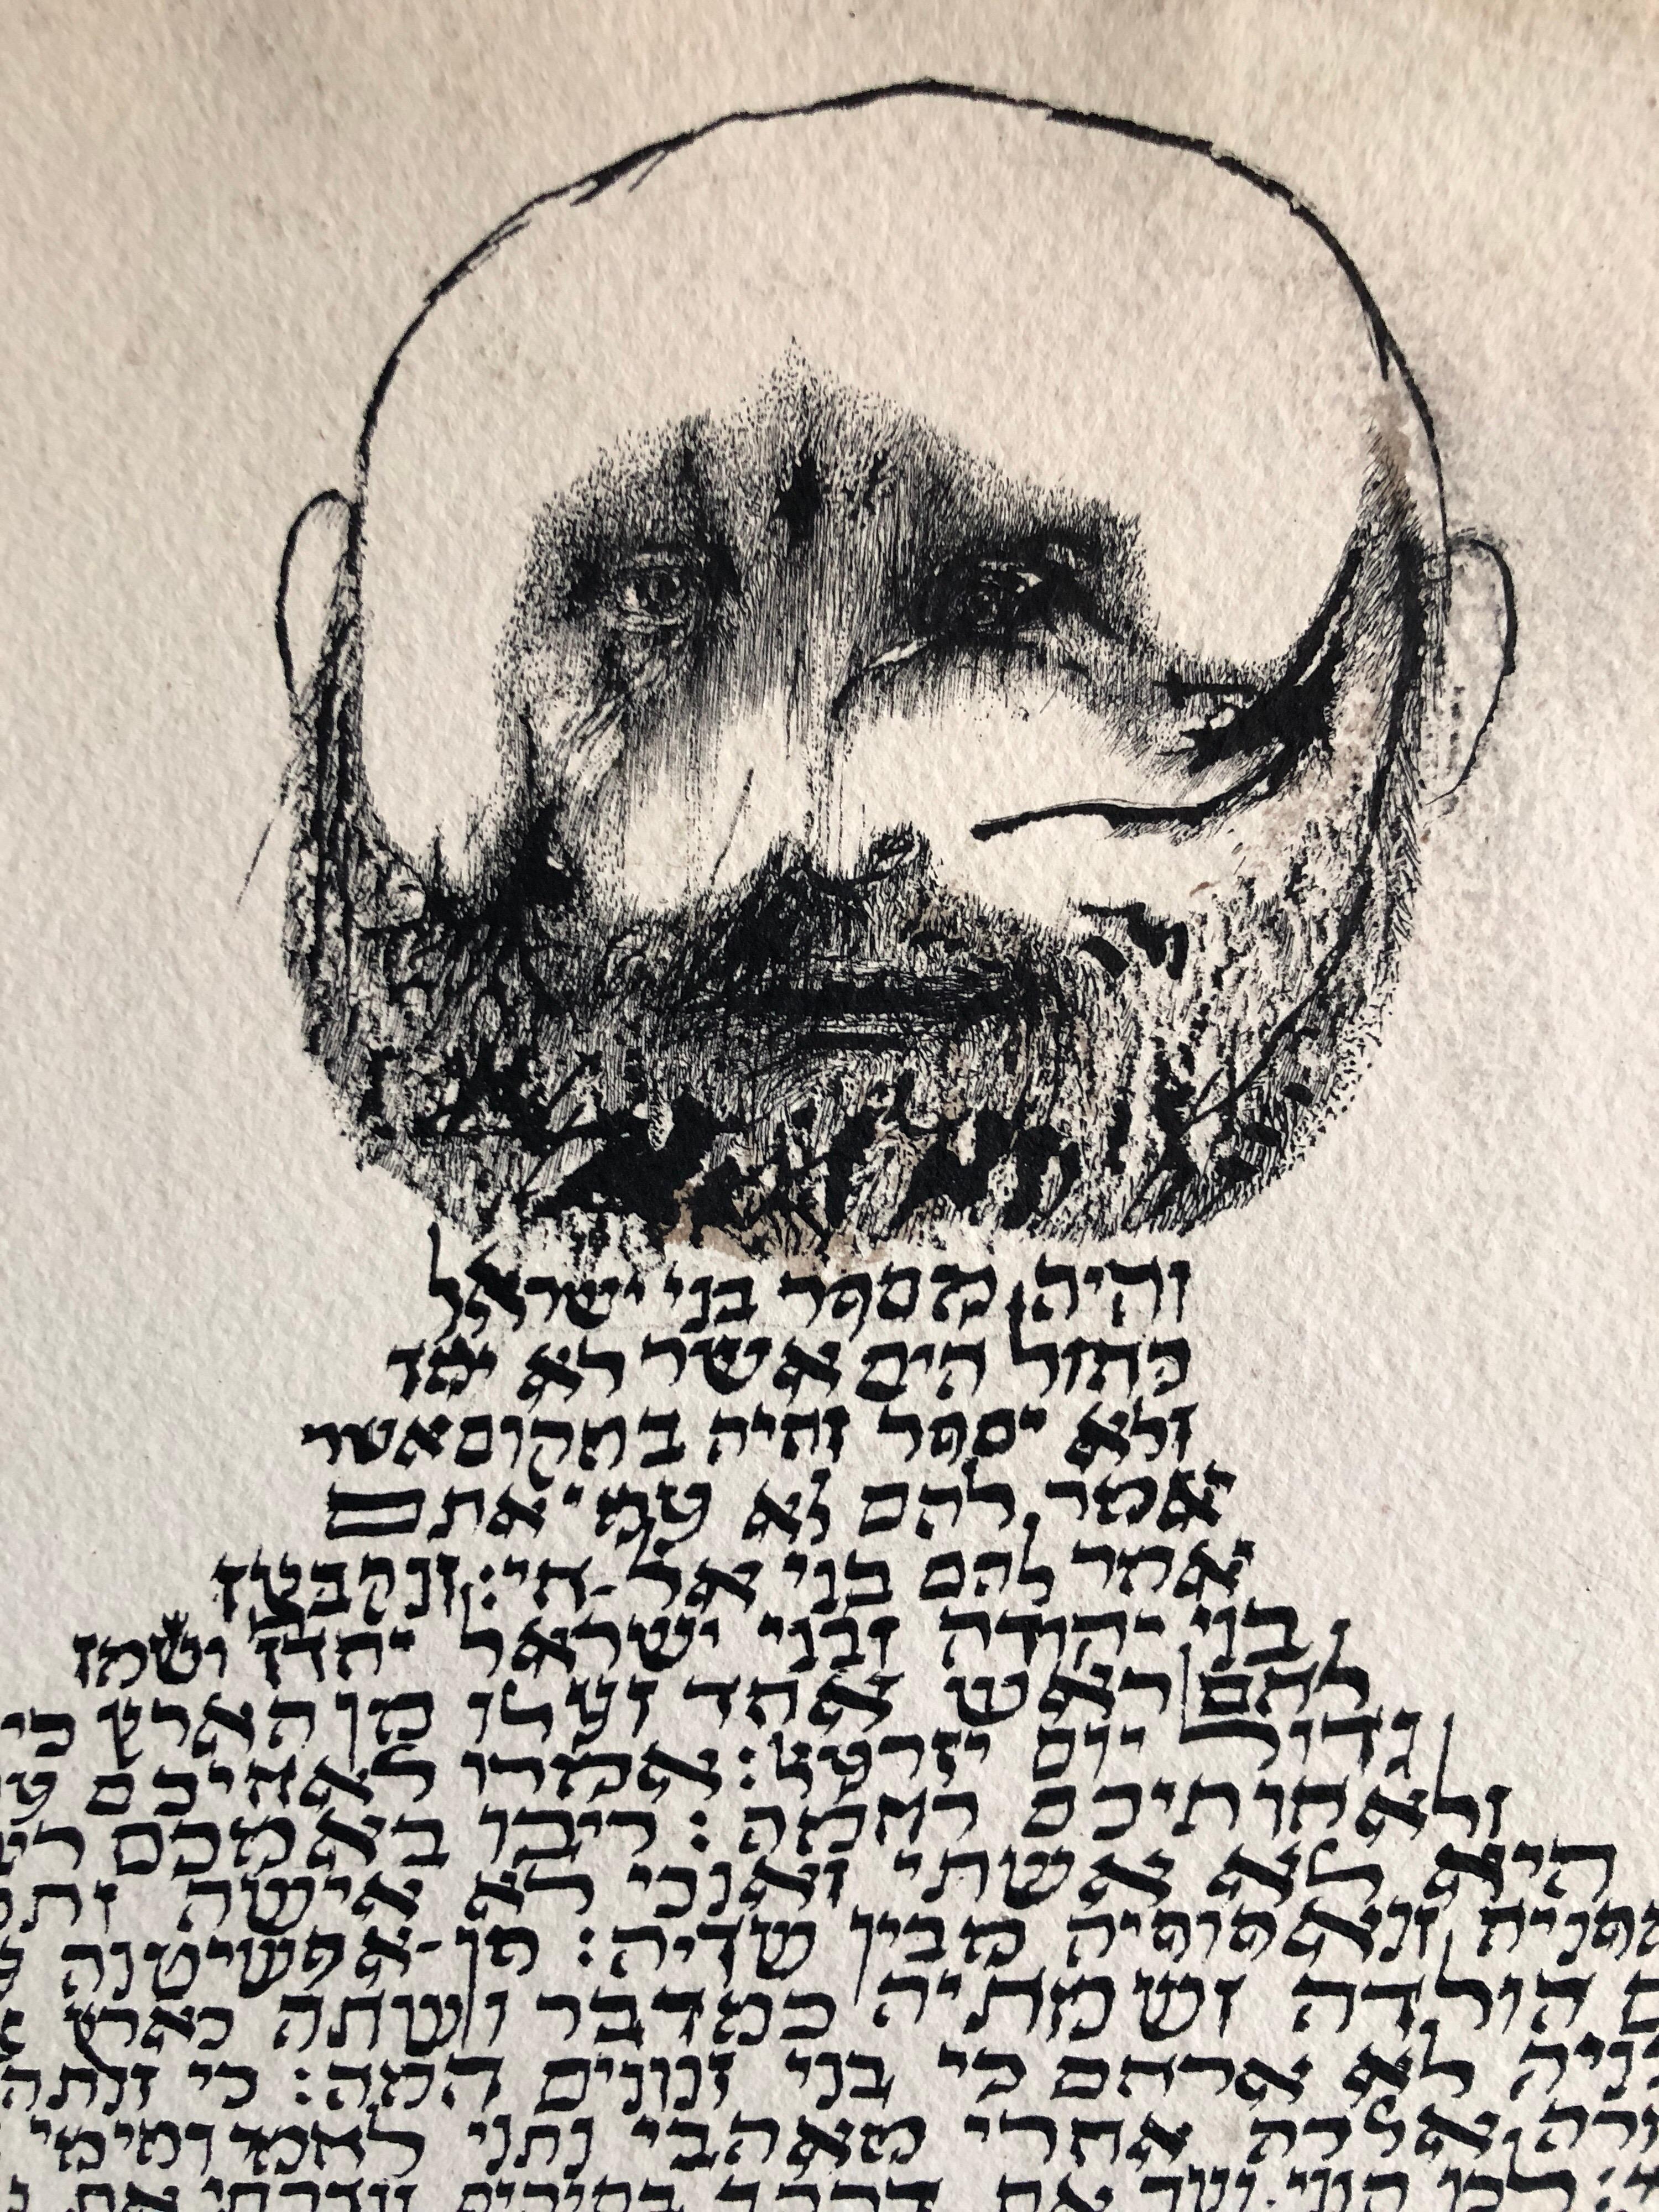 Extensive Hebrew calligraphic text in two tones of ink with a classic Baskin head painted at the top. It is a text from the Bible, it appears to be a Haftorah.
This piece does not appear to be signed or dated. there is a faint drawing verso that